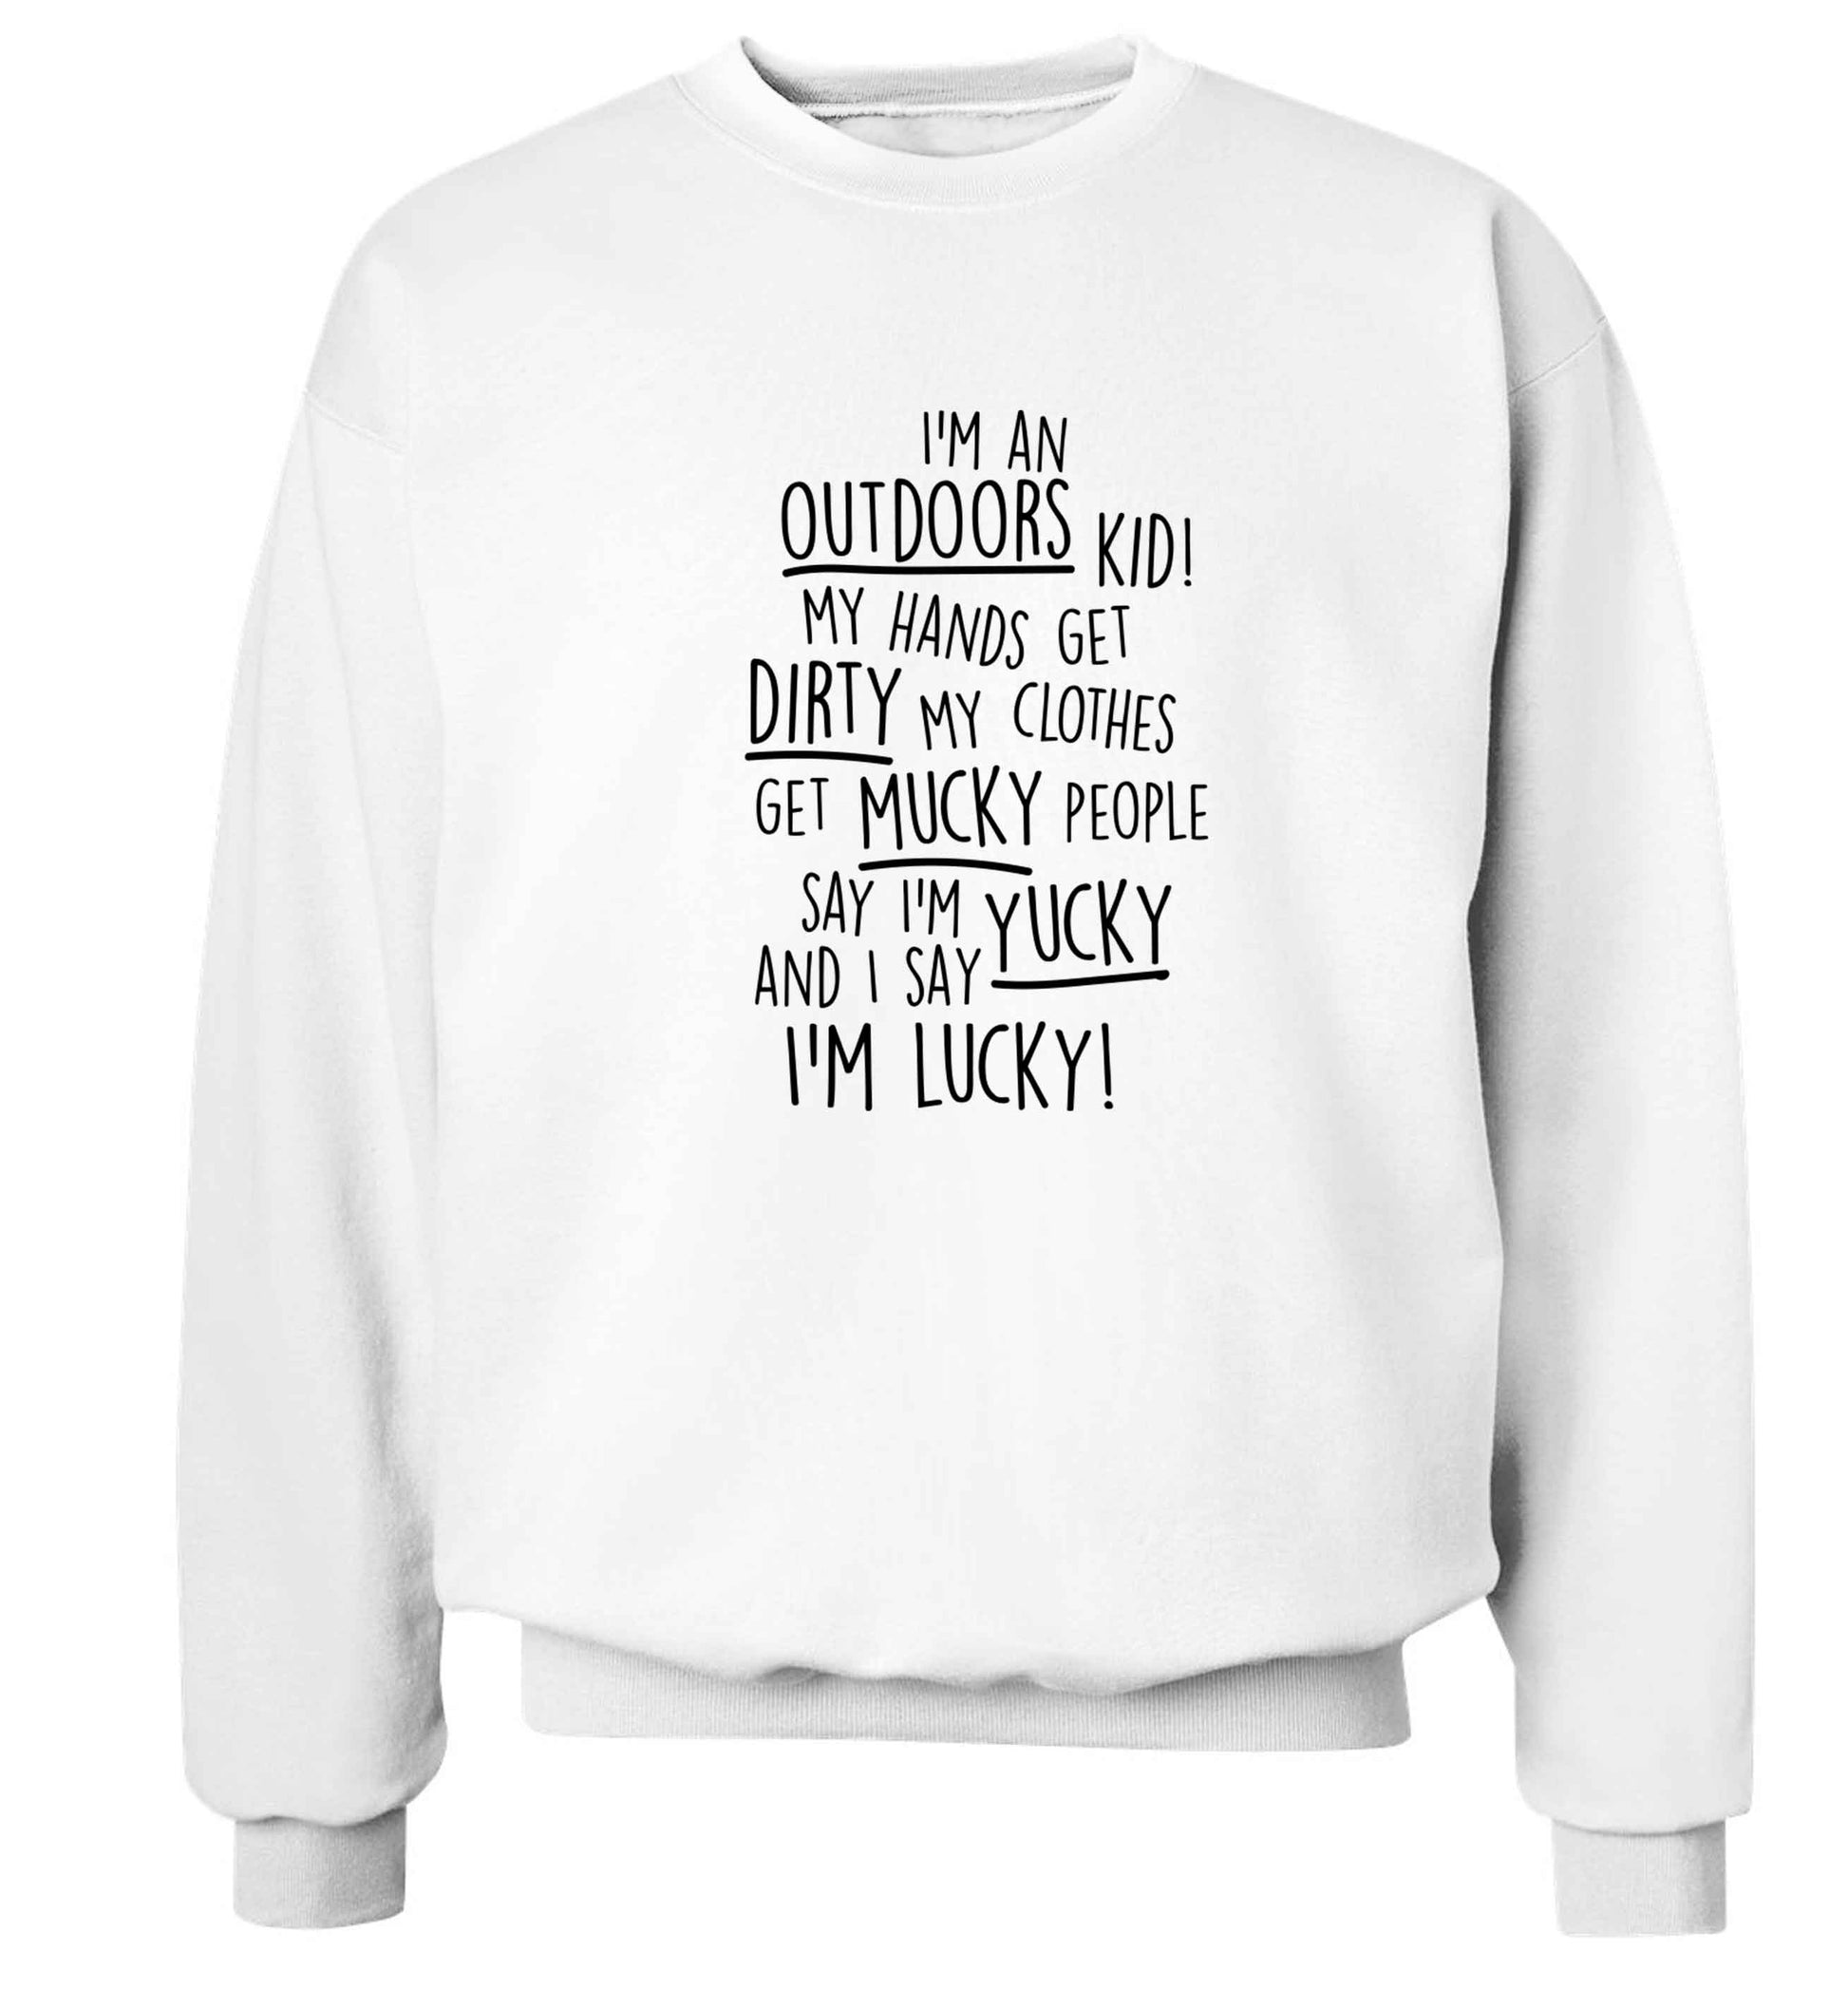 I'm an outdoors kid poem Adult's unisex white Sweater 2XL